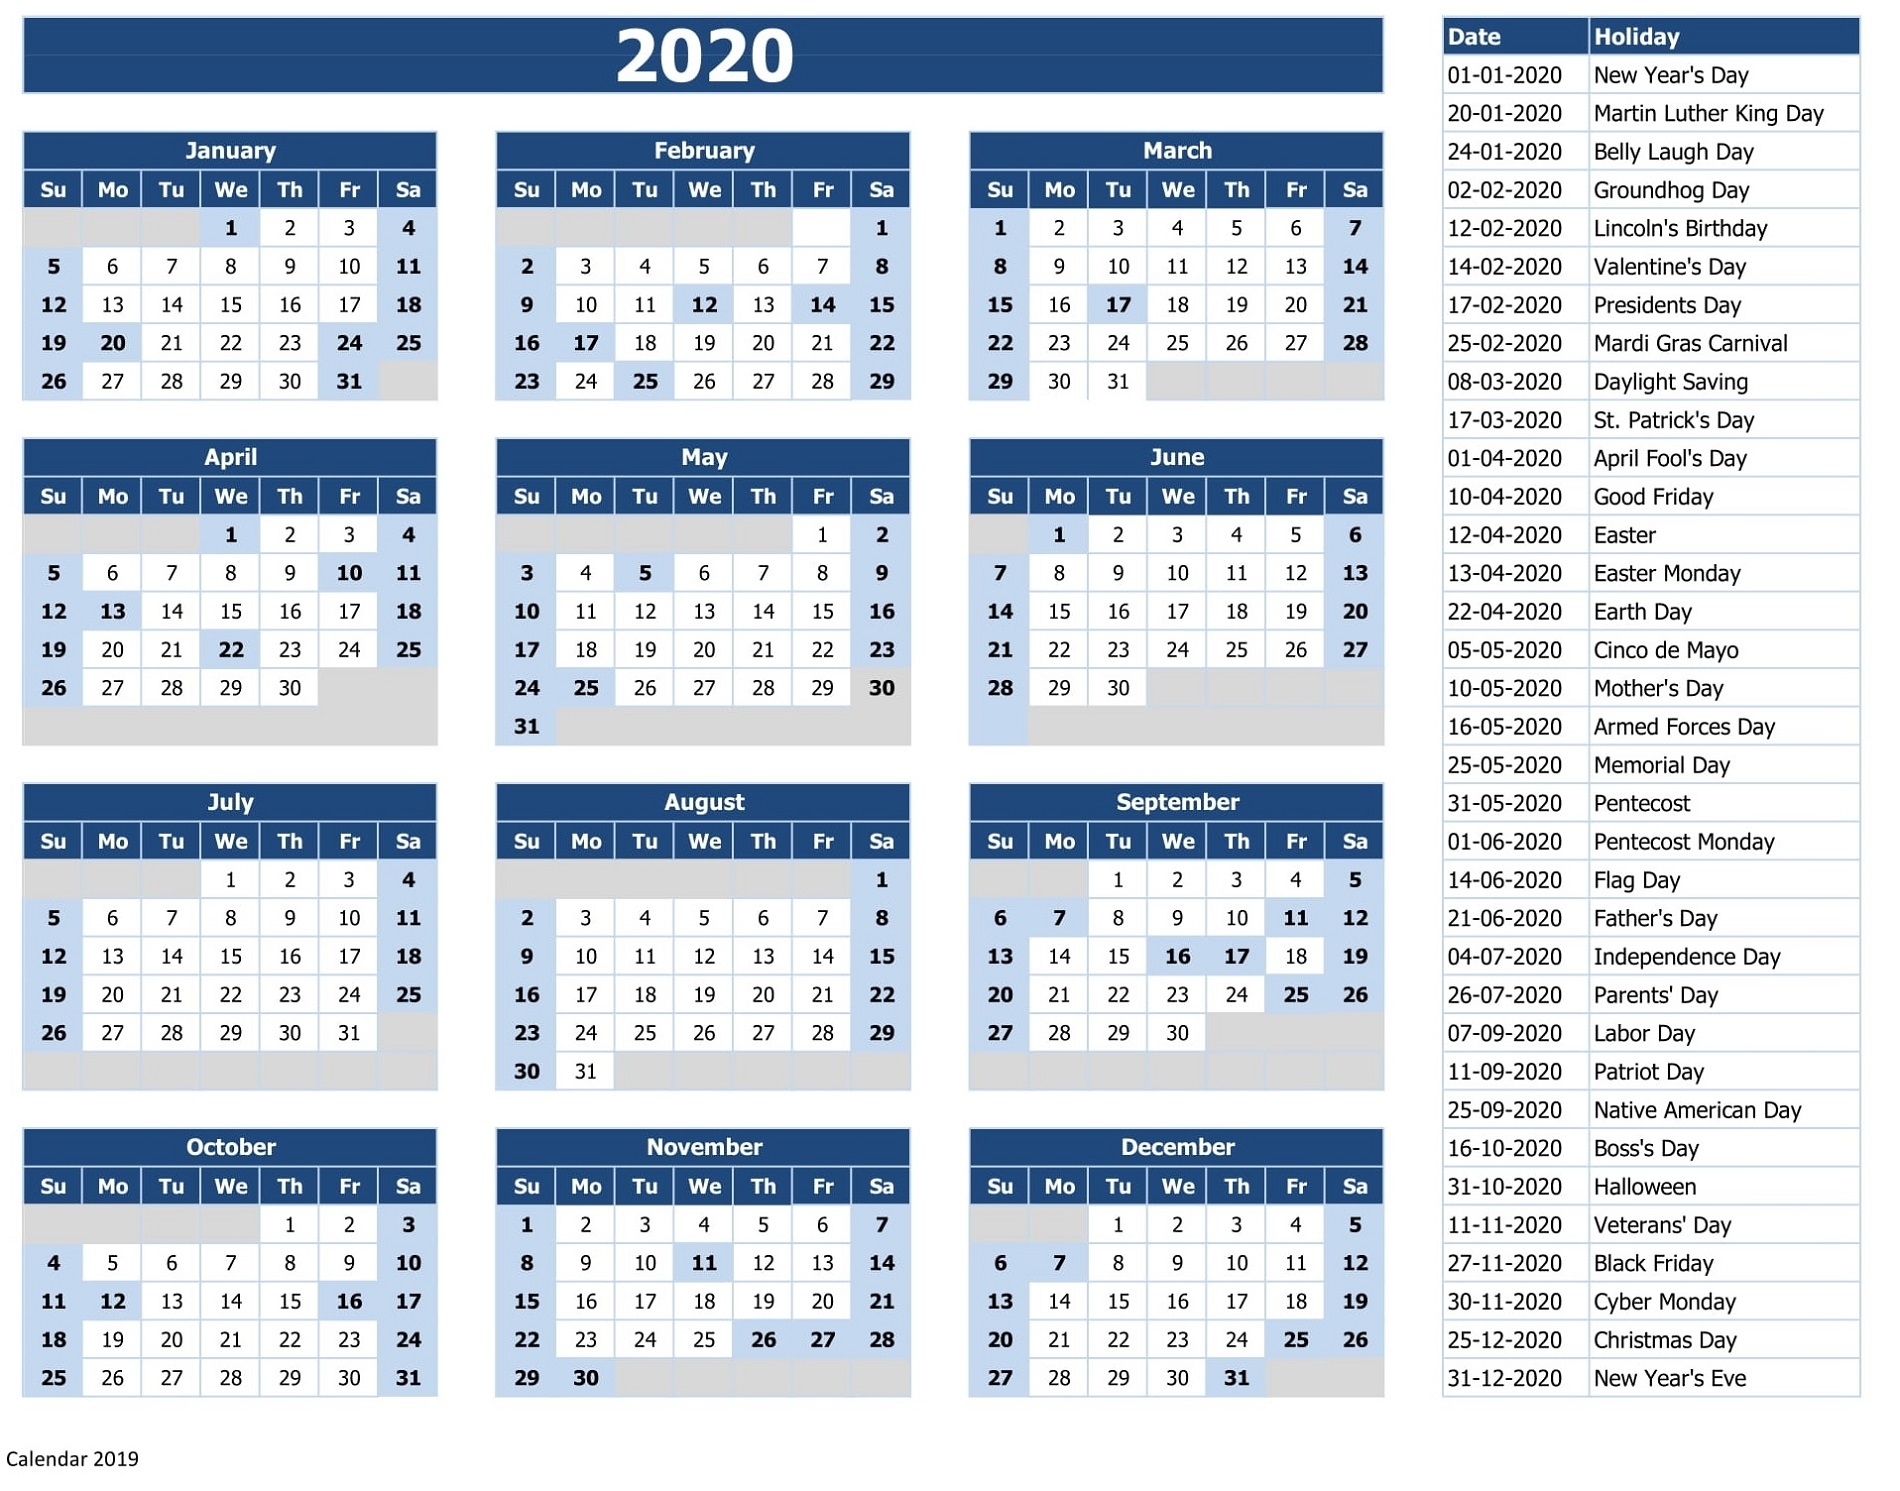 2020 Calendar Printable With Holidays And Notes | Calendar Remarkable 2020 Calendar Template Calendarlabs.com